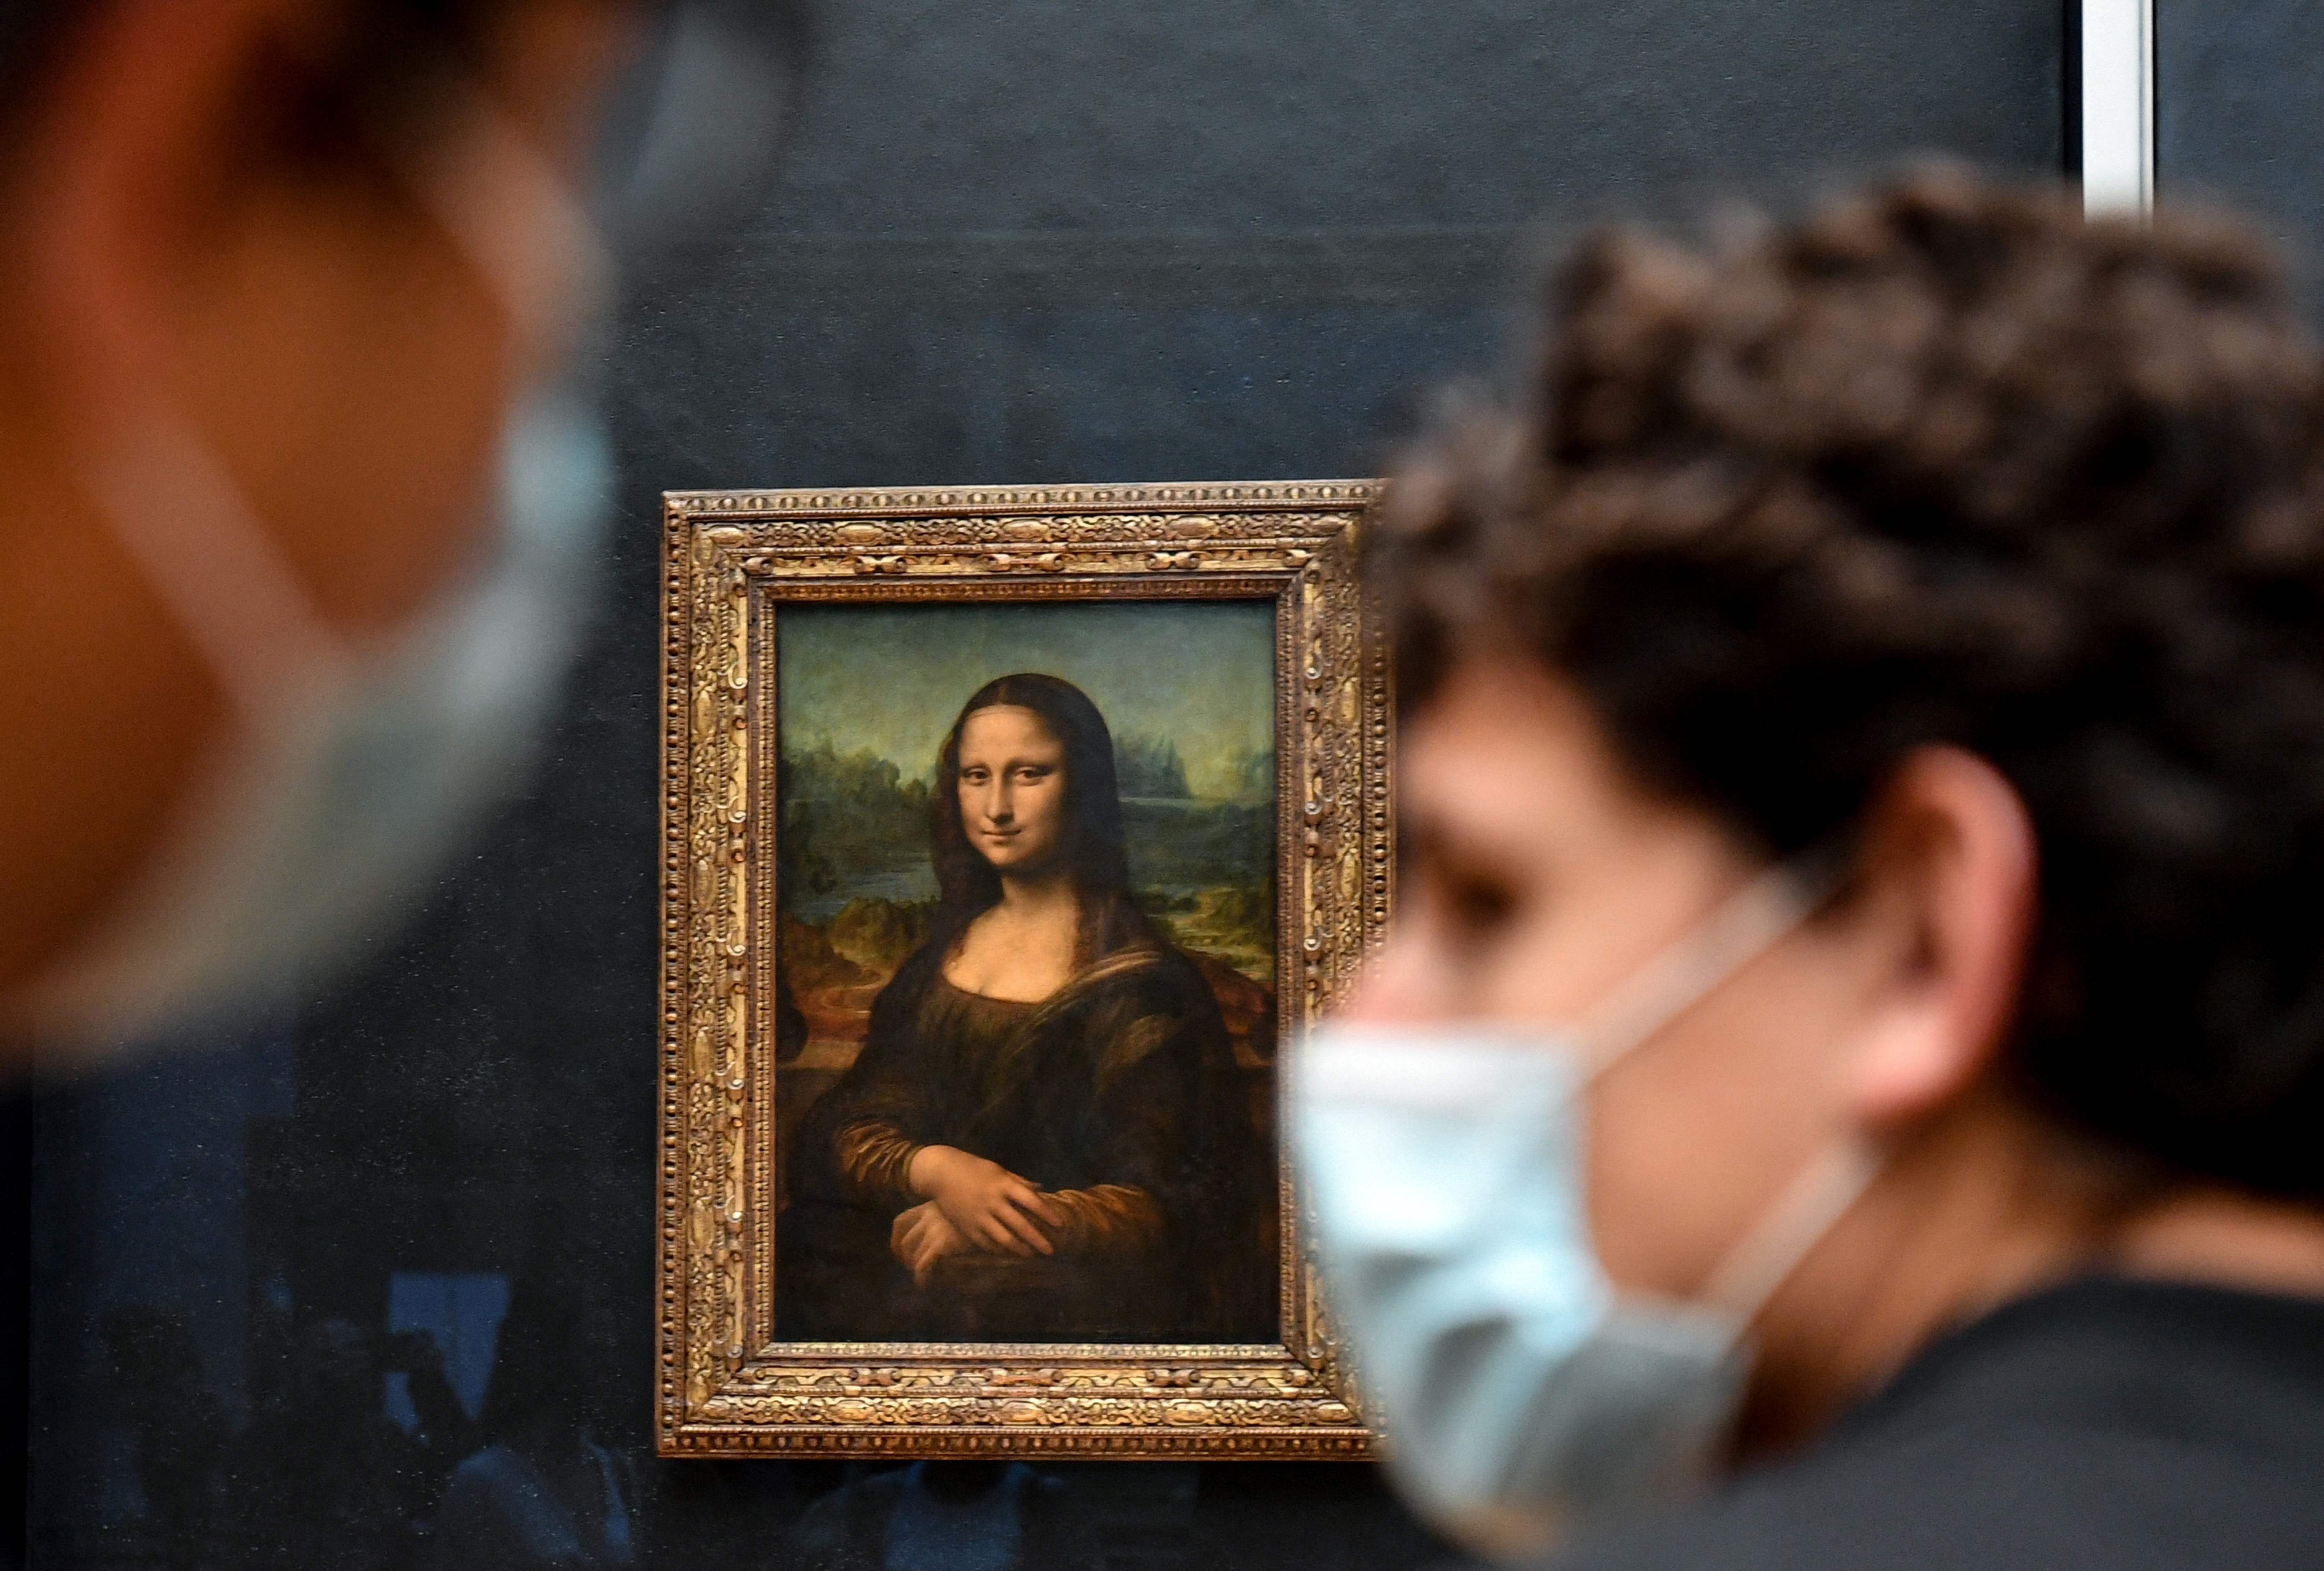 The Mona Lisa on display at the Louvre Museum in Paris